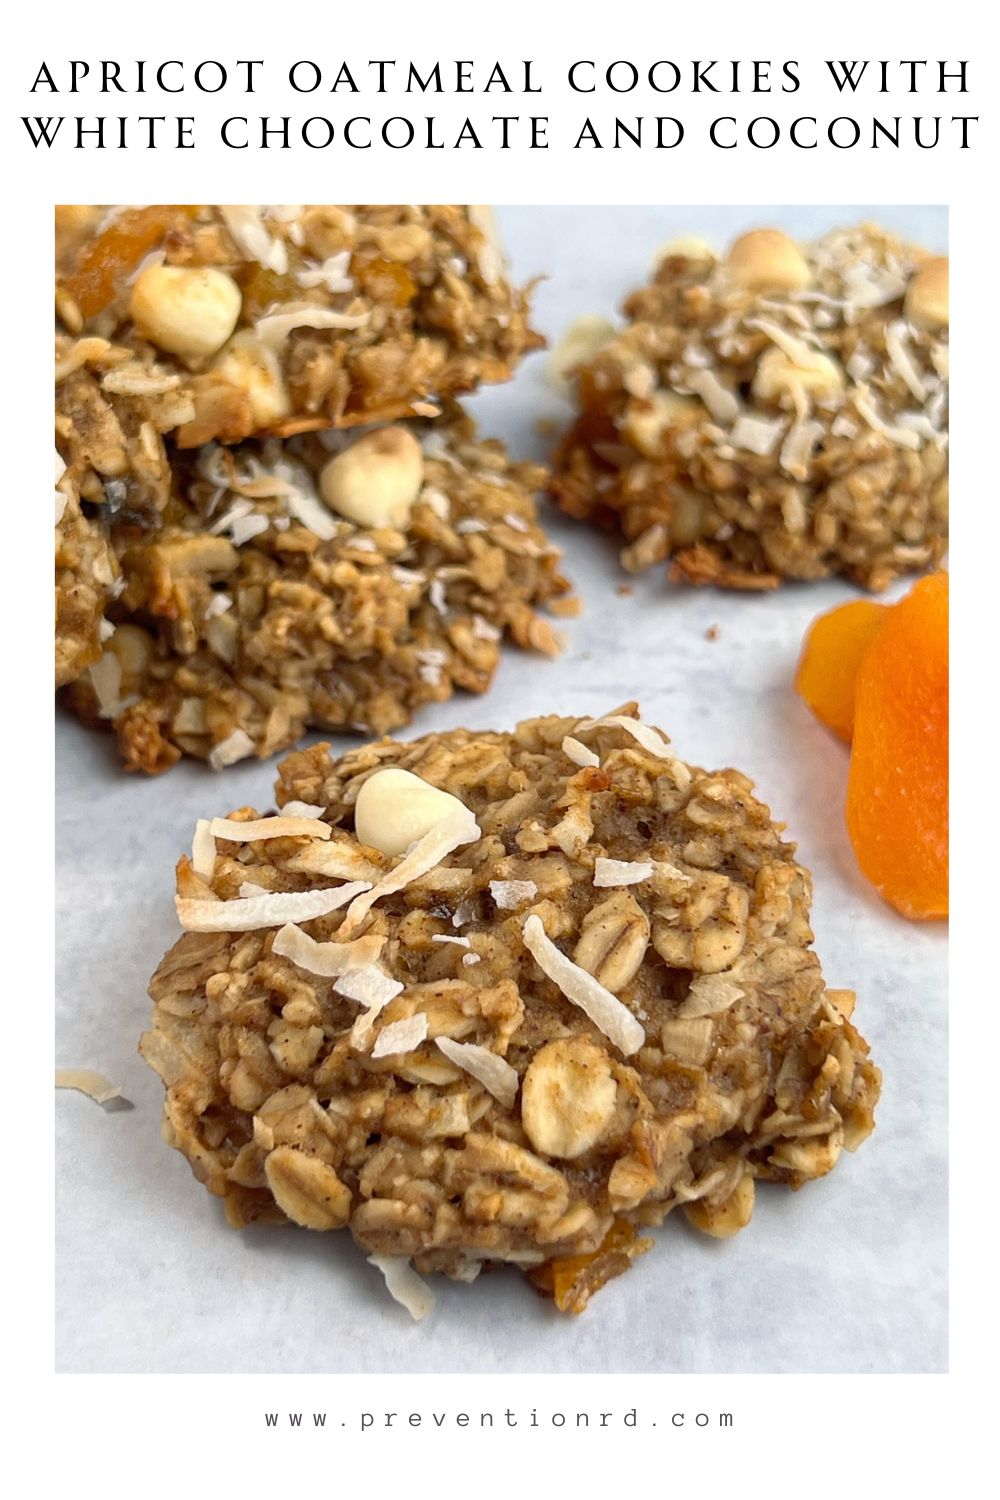 Apricot Oatmeal Cookies with White Chocolate and Coconut via @preventionrd